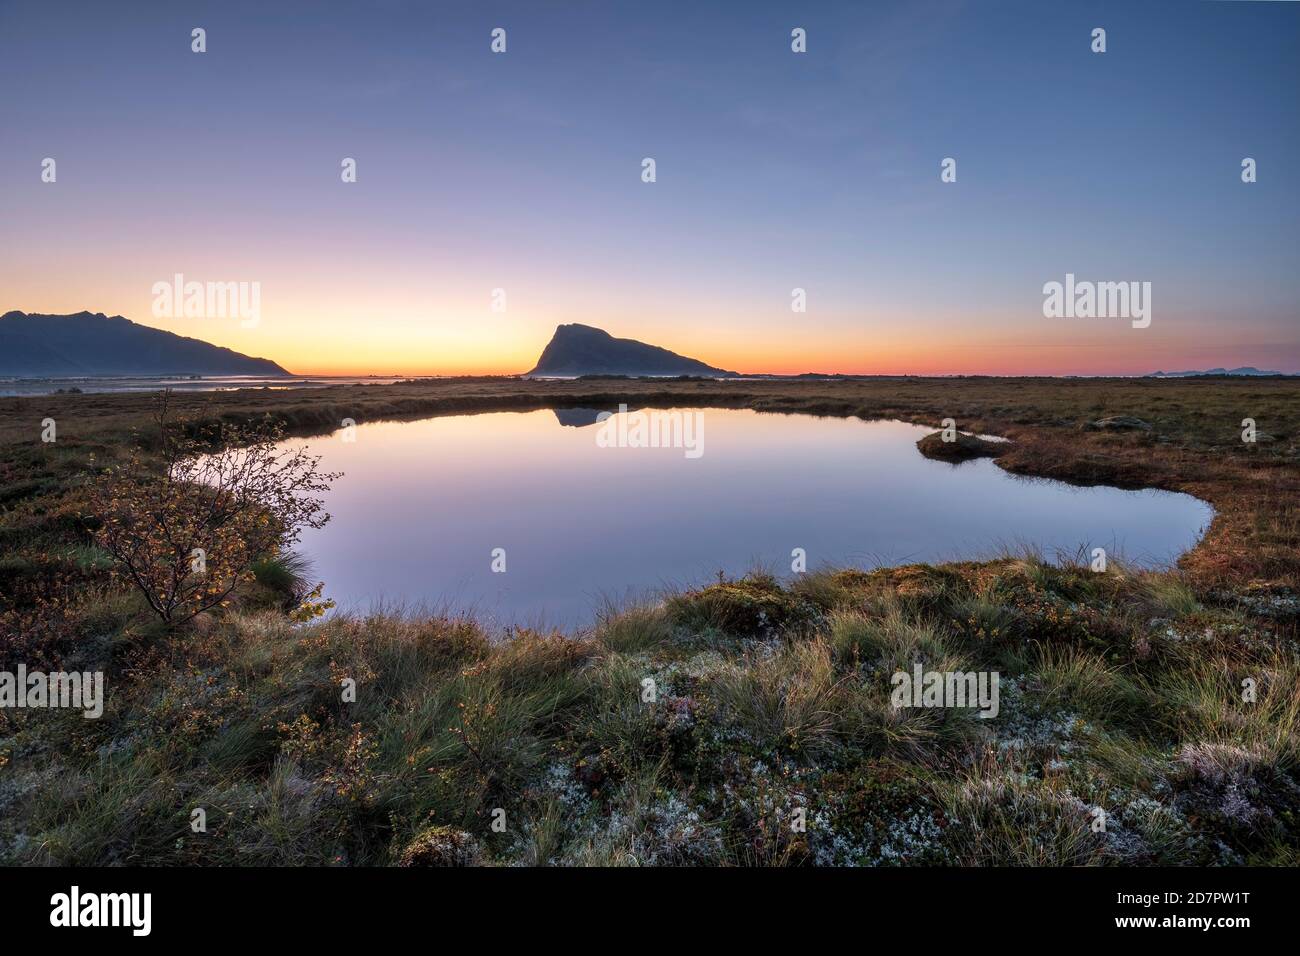 Swampland, dusk is reflected in a small round lake, in the back mountain silhouette on the horizon, Gimsoy, Lofoten, Nordland, Norway Stock Photo